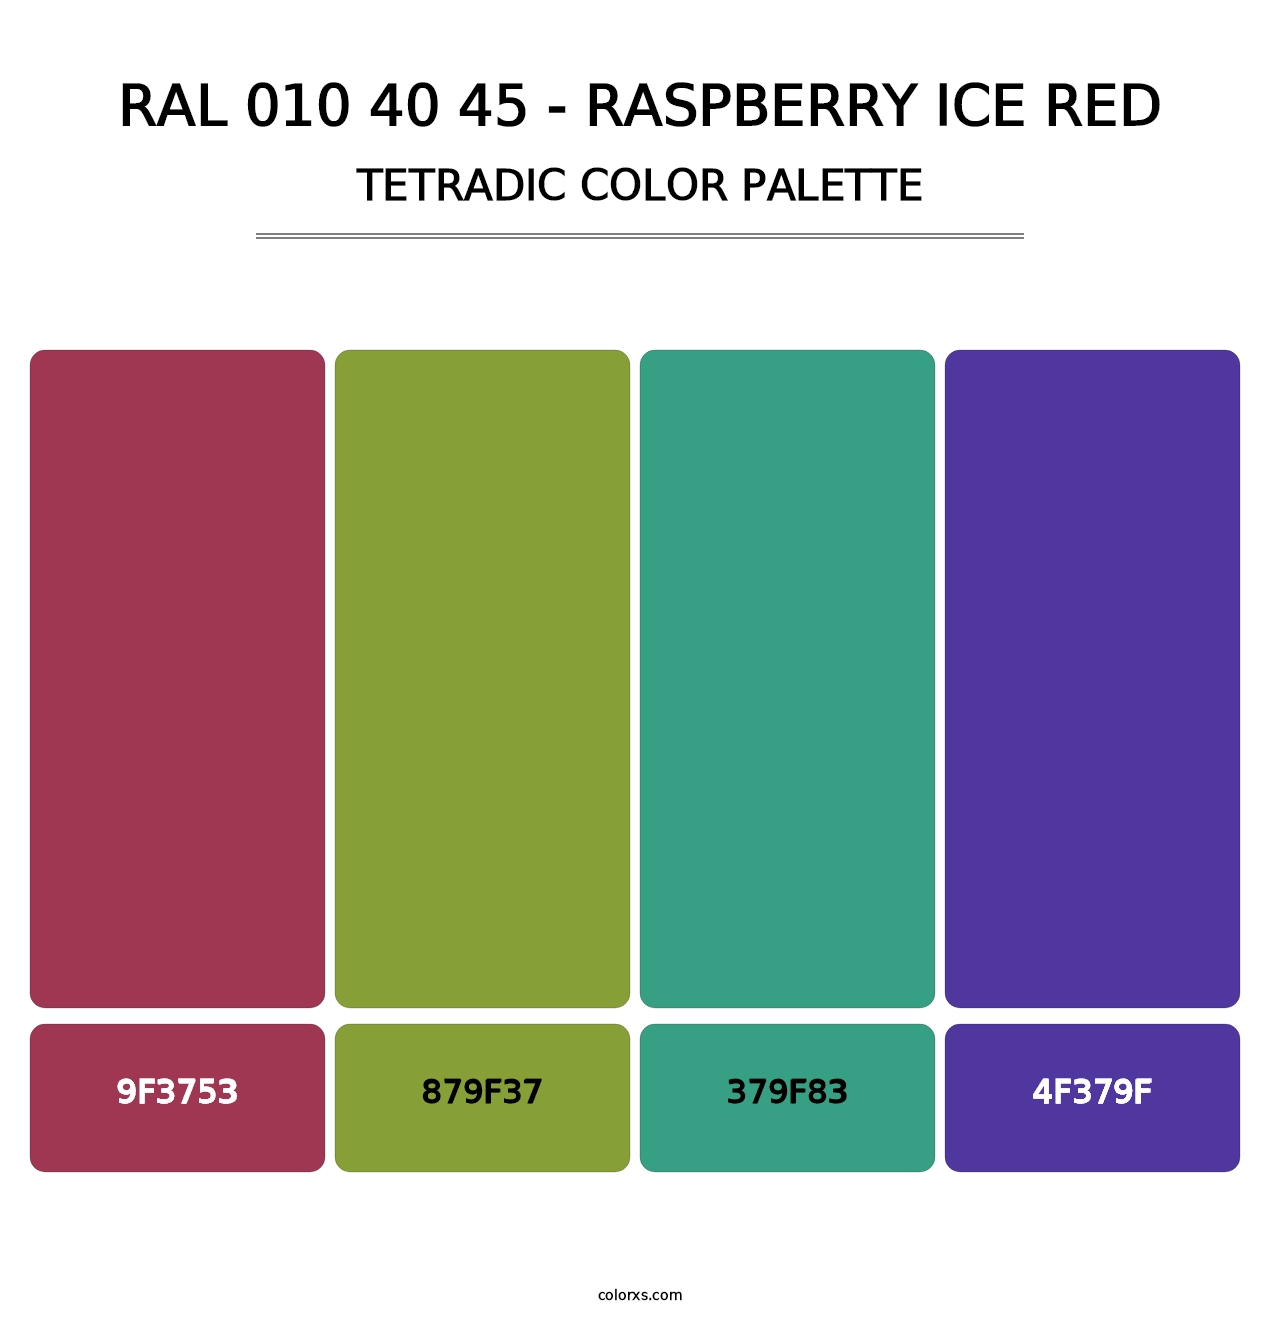 RAL 010 40 45 - Raspberry Ice Red - Tetradic Color Palette